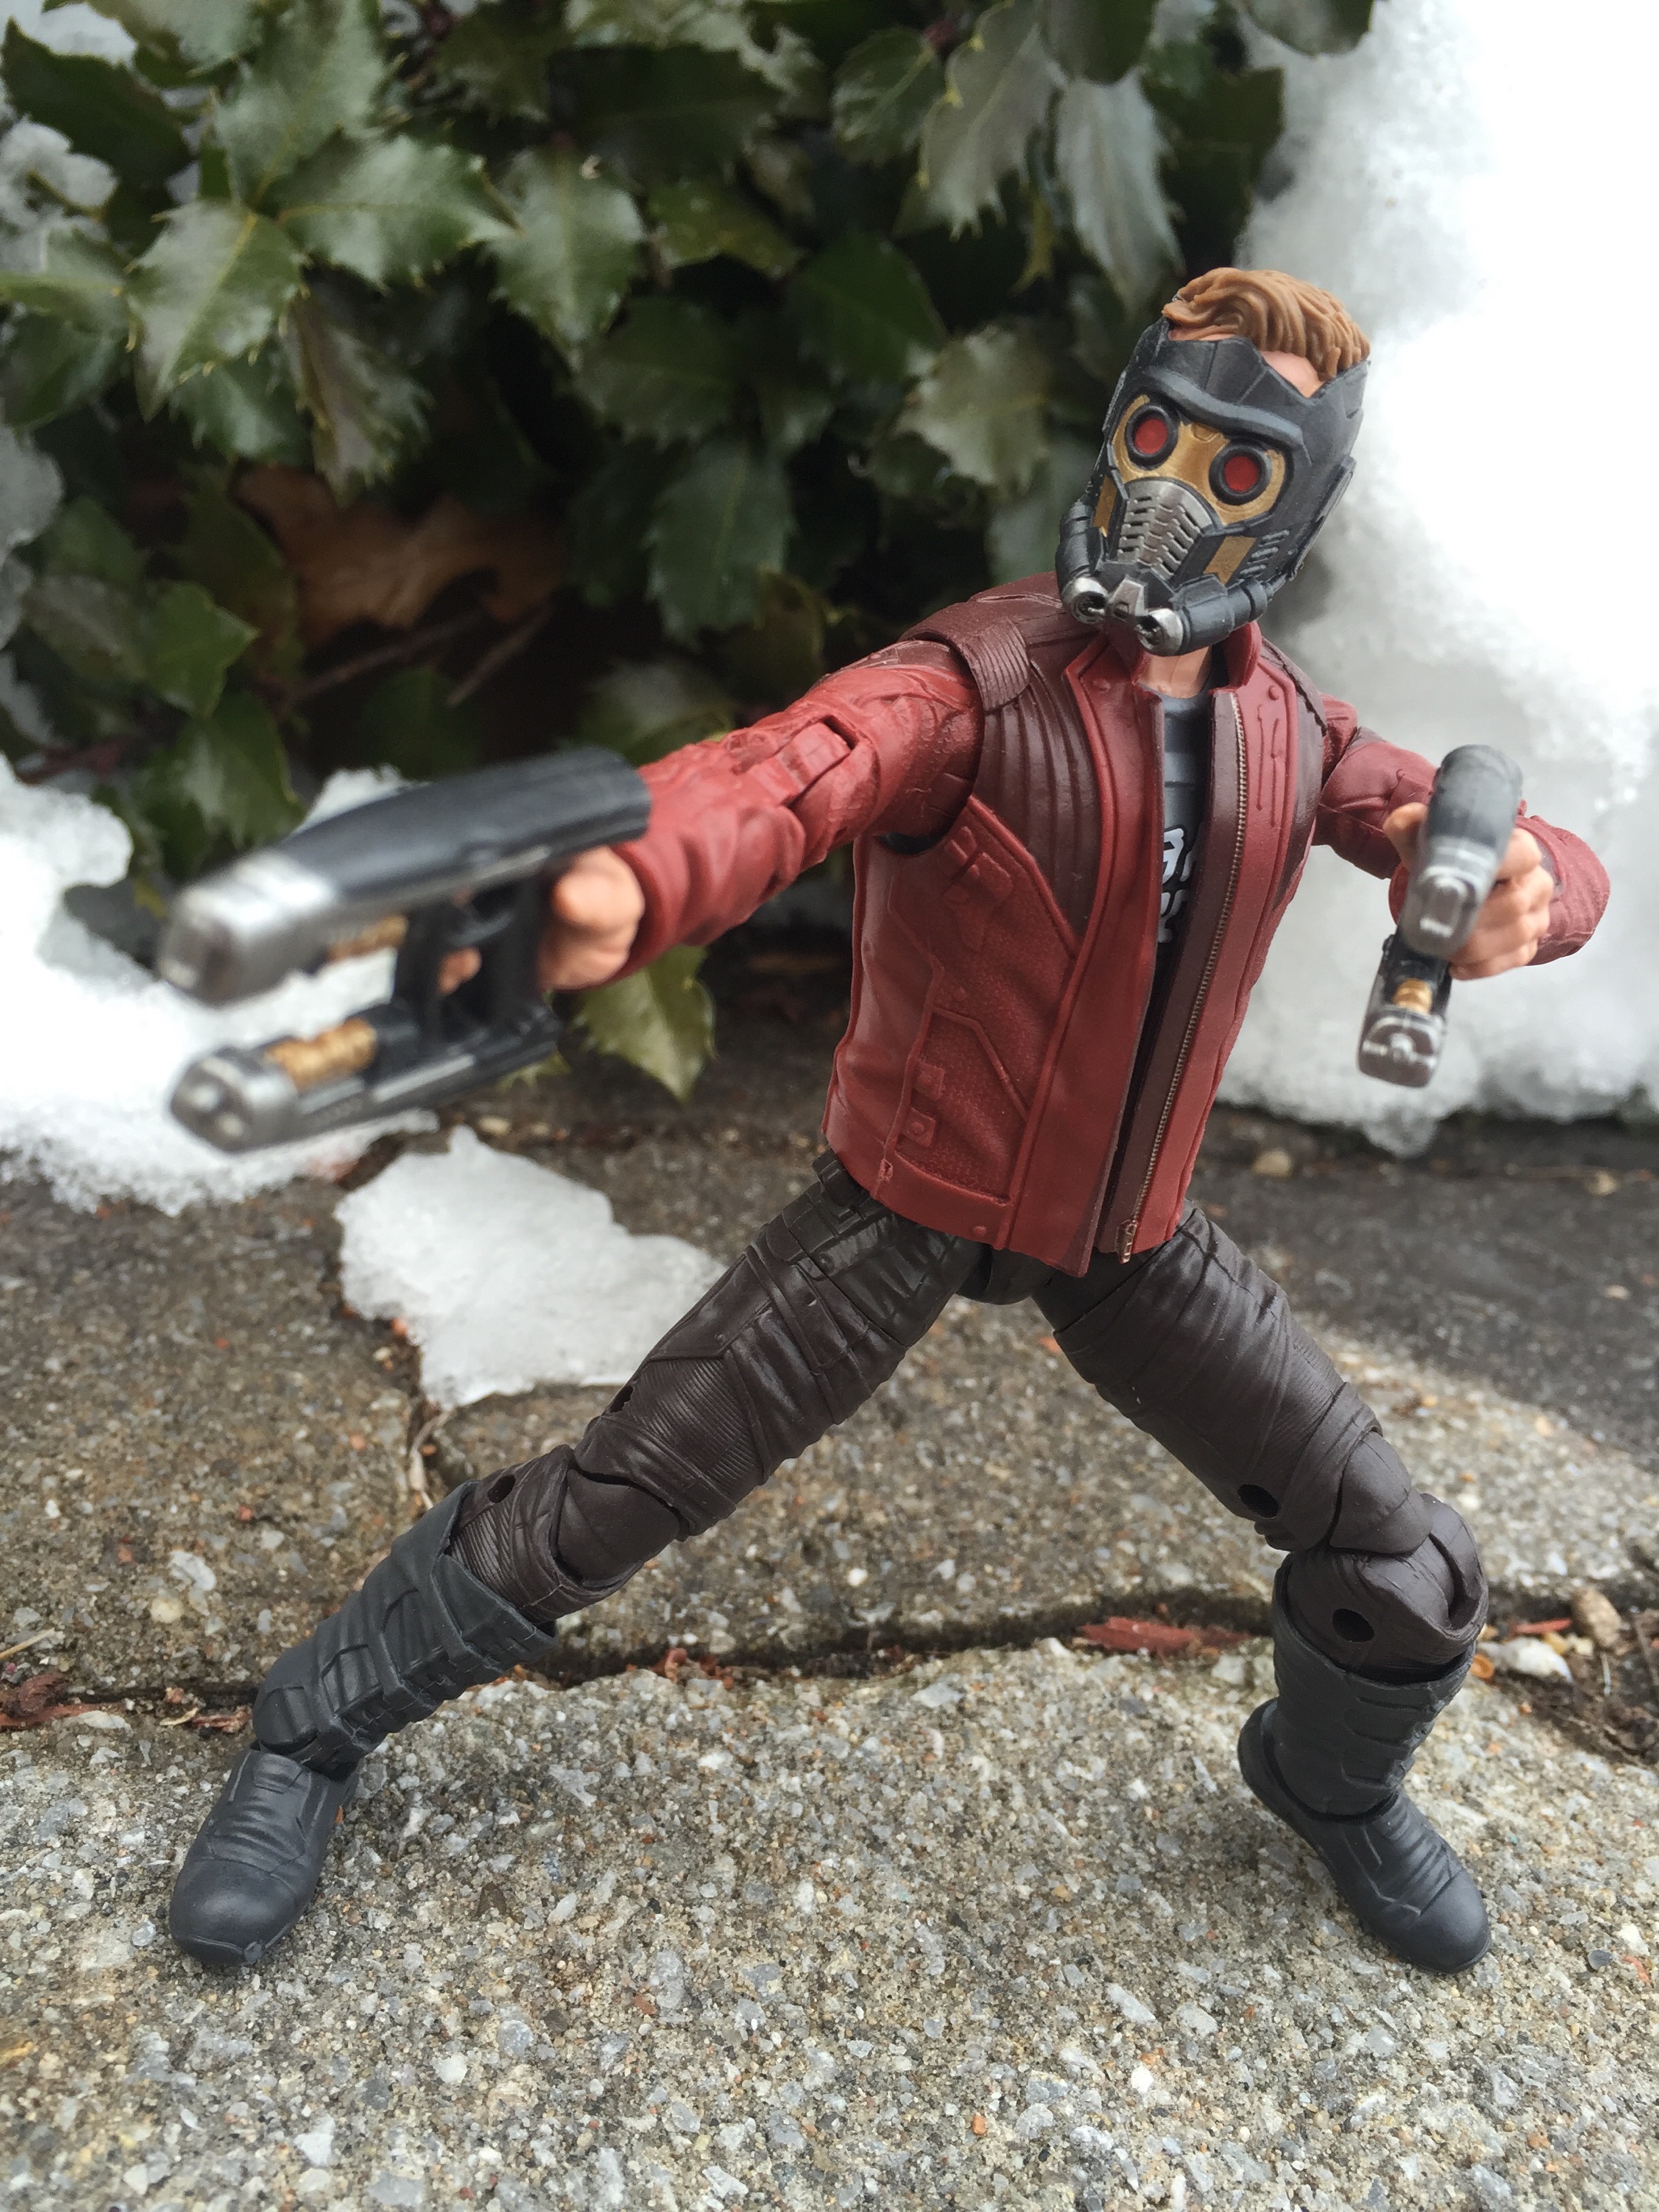 2017 Marvel Legends StarLord 6" Figure Review GOTG Vol. 2